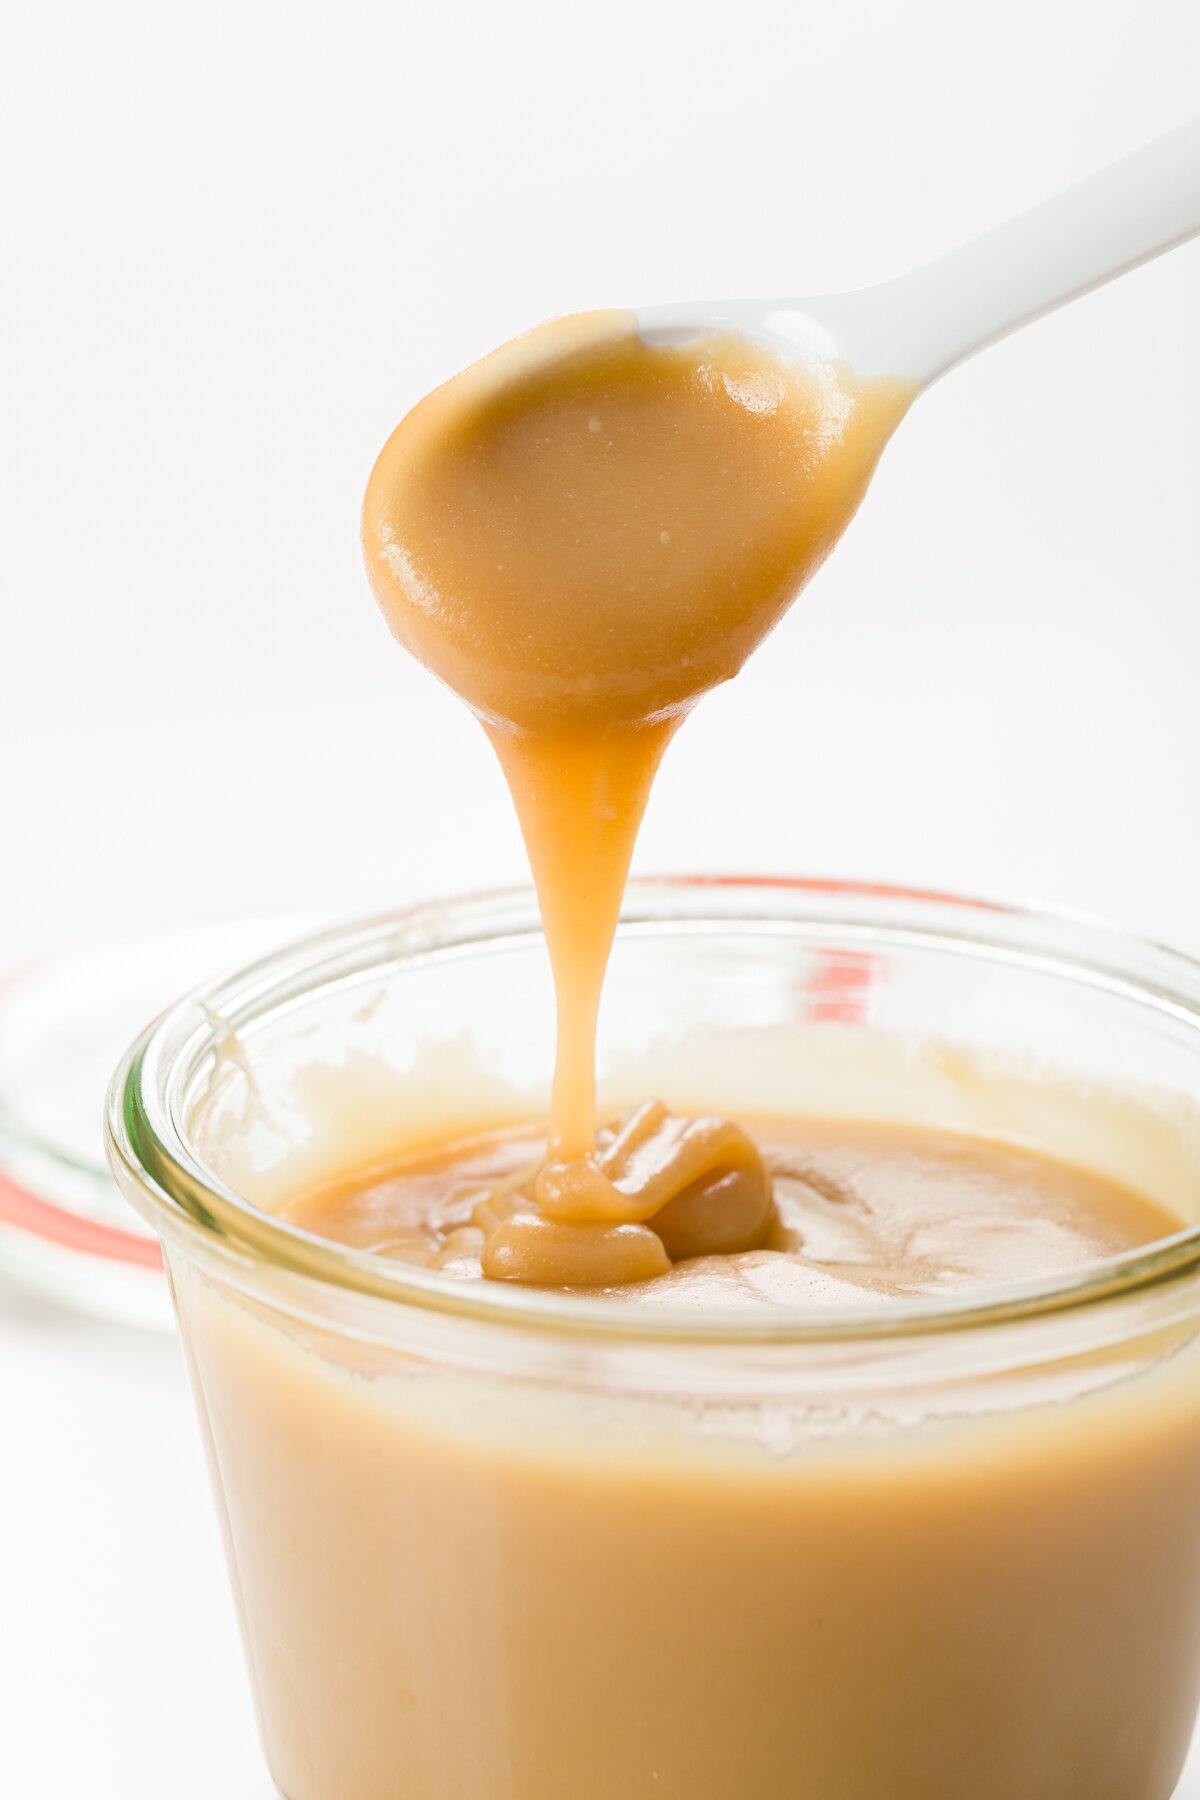 Butterscotch dripping off a spoon into a jar